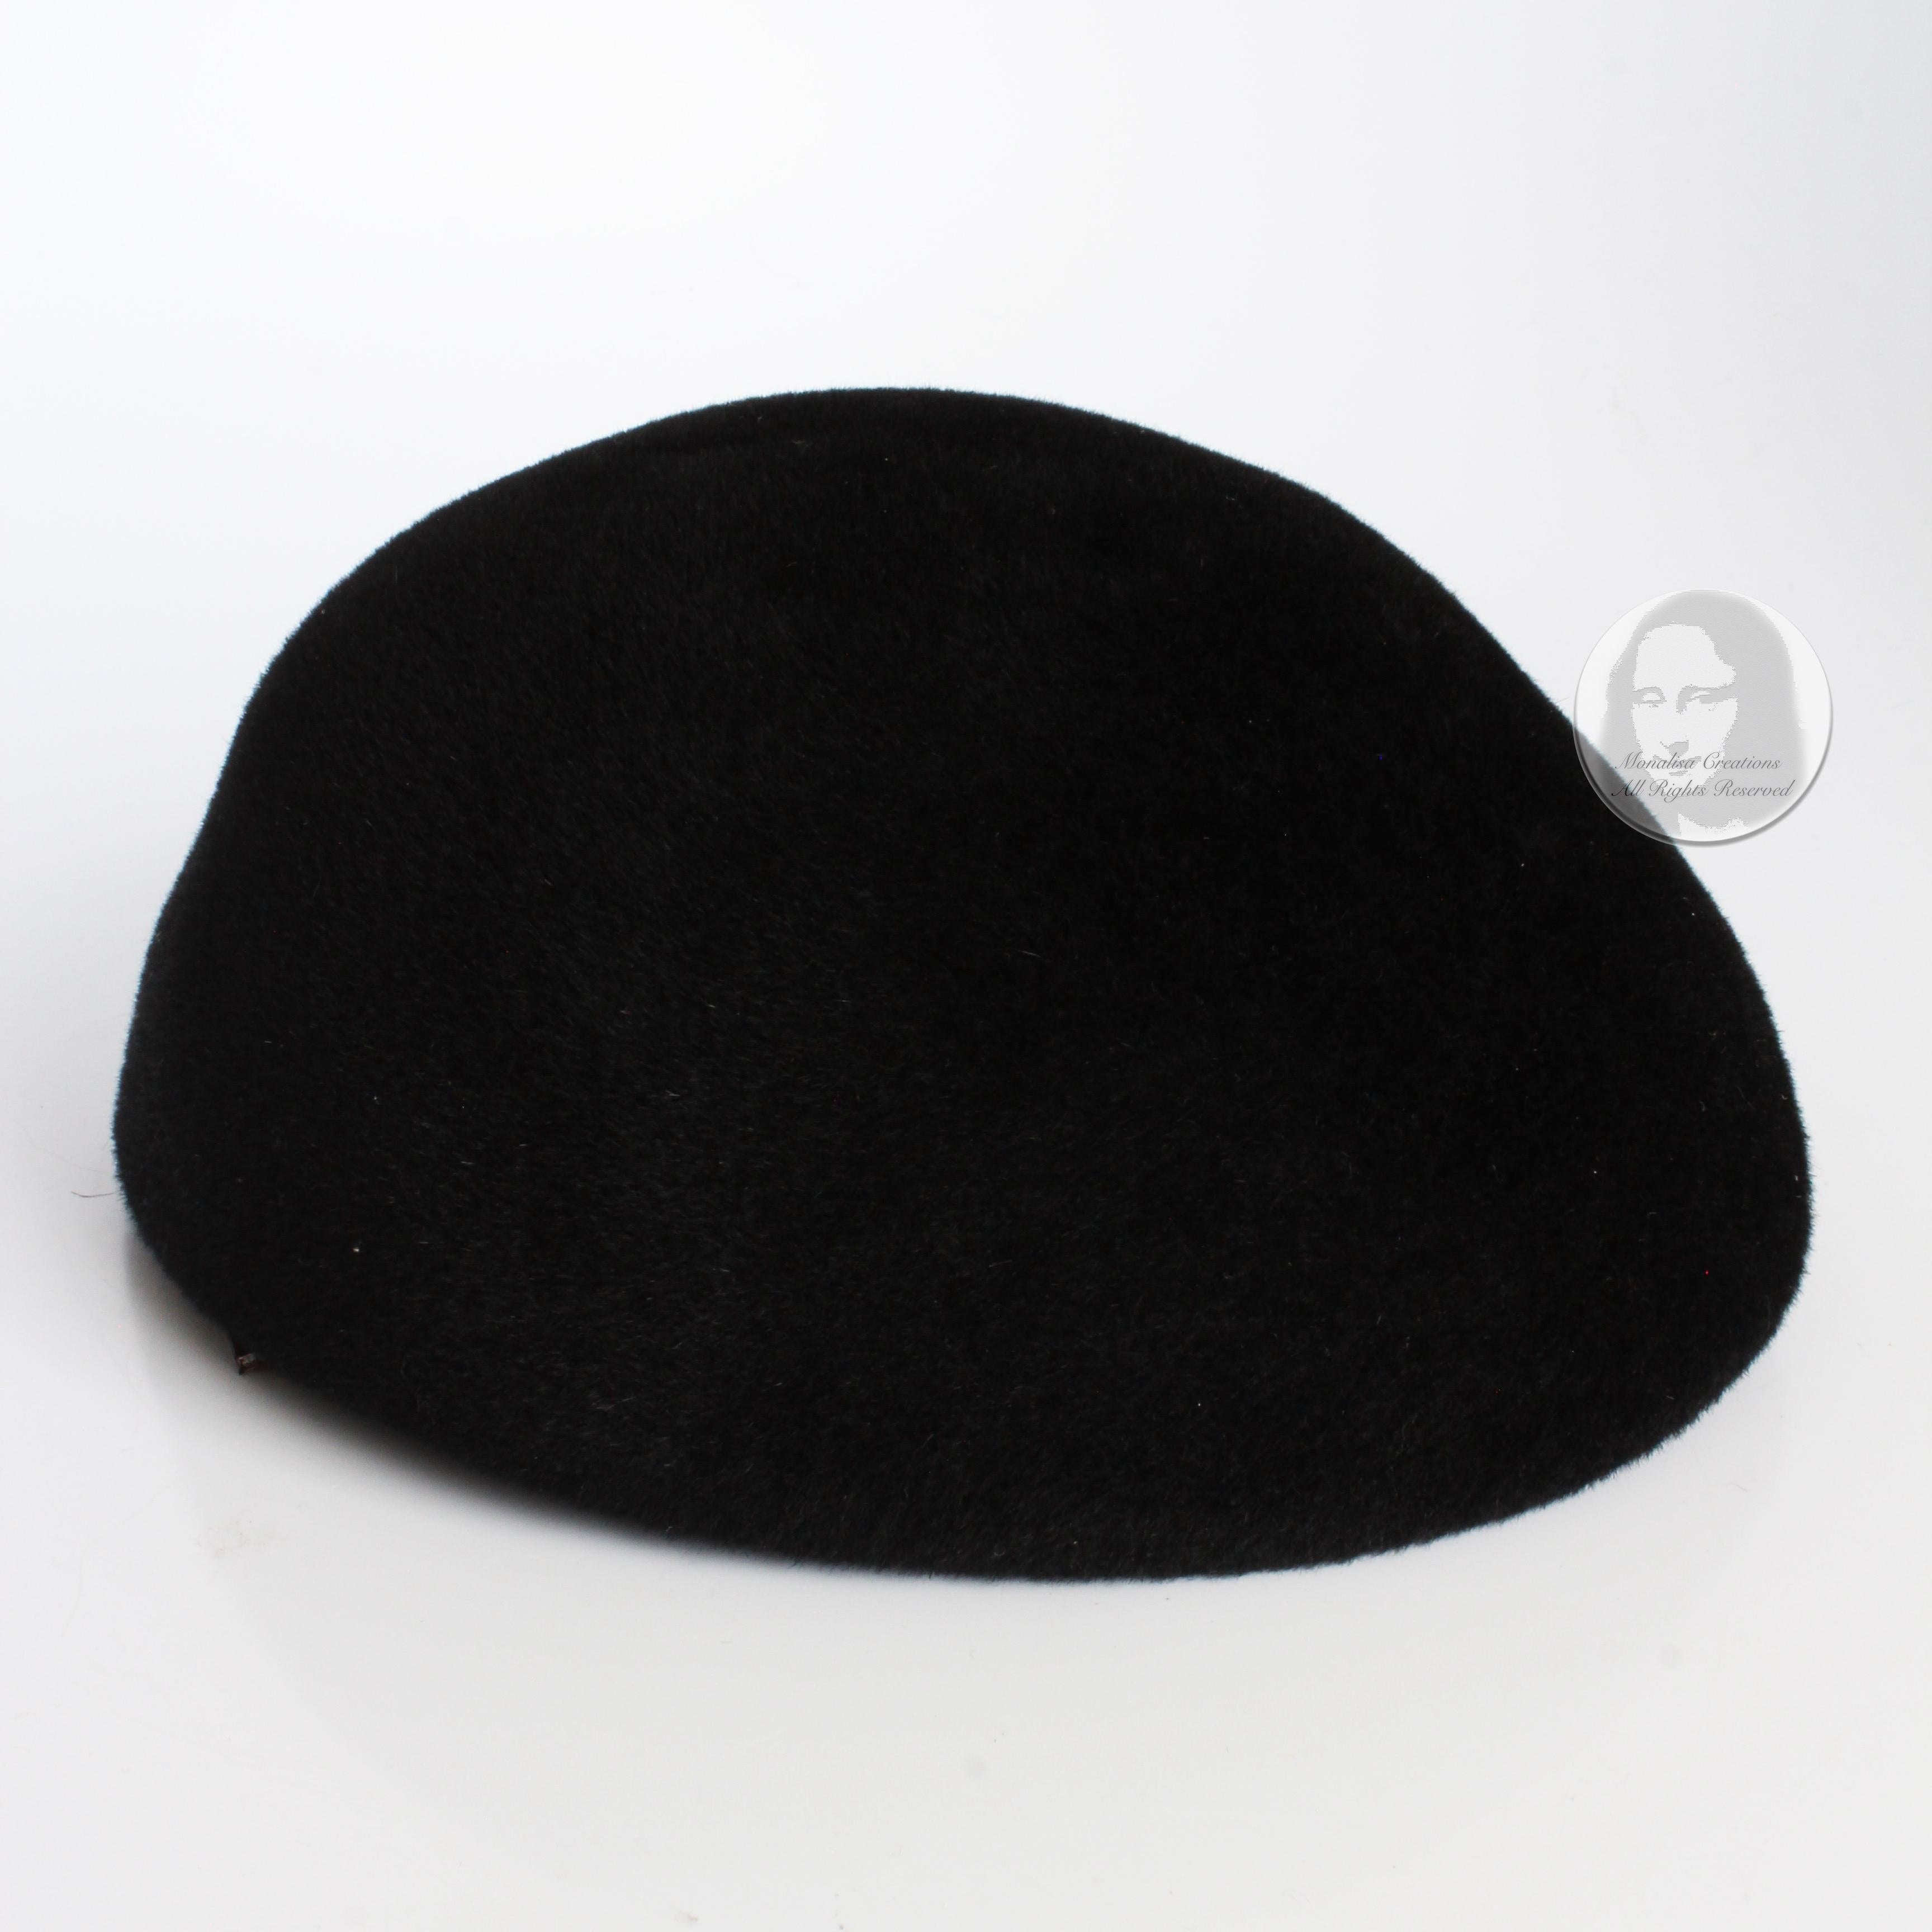 Frank Olive for I. Magnin Calot or Juliette hat, likely made in the late 60s.  Made from an incredibly soft black velour, it features tiny hair combs at each side to secure for wear.  

So easy to wear and elevate your style! A classic accessory